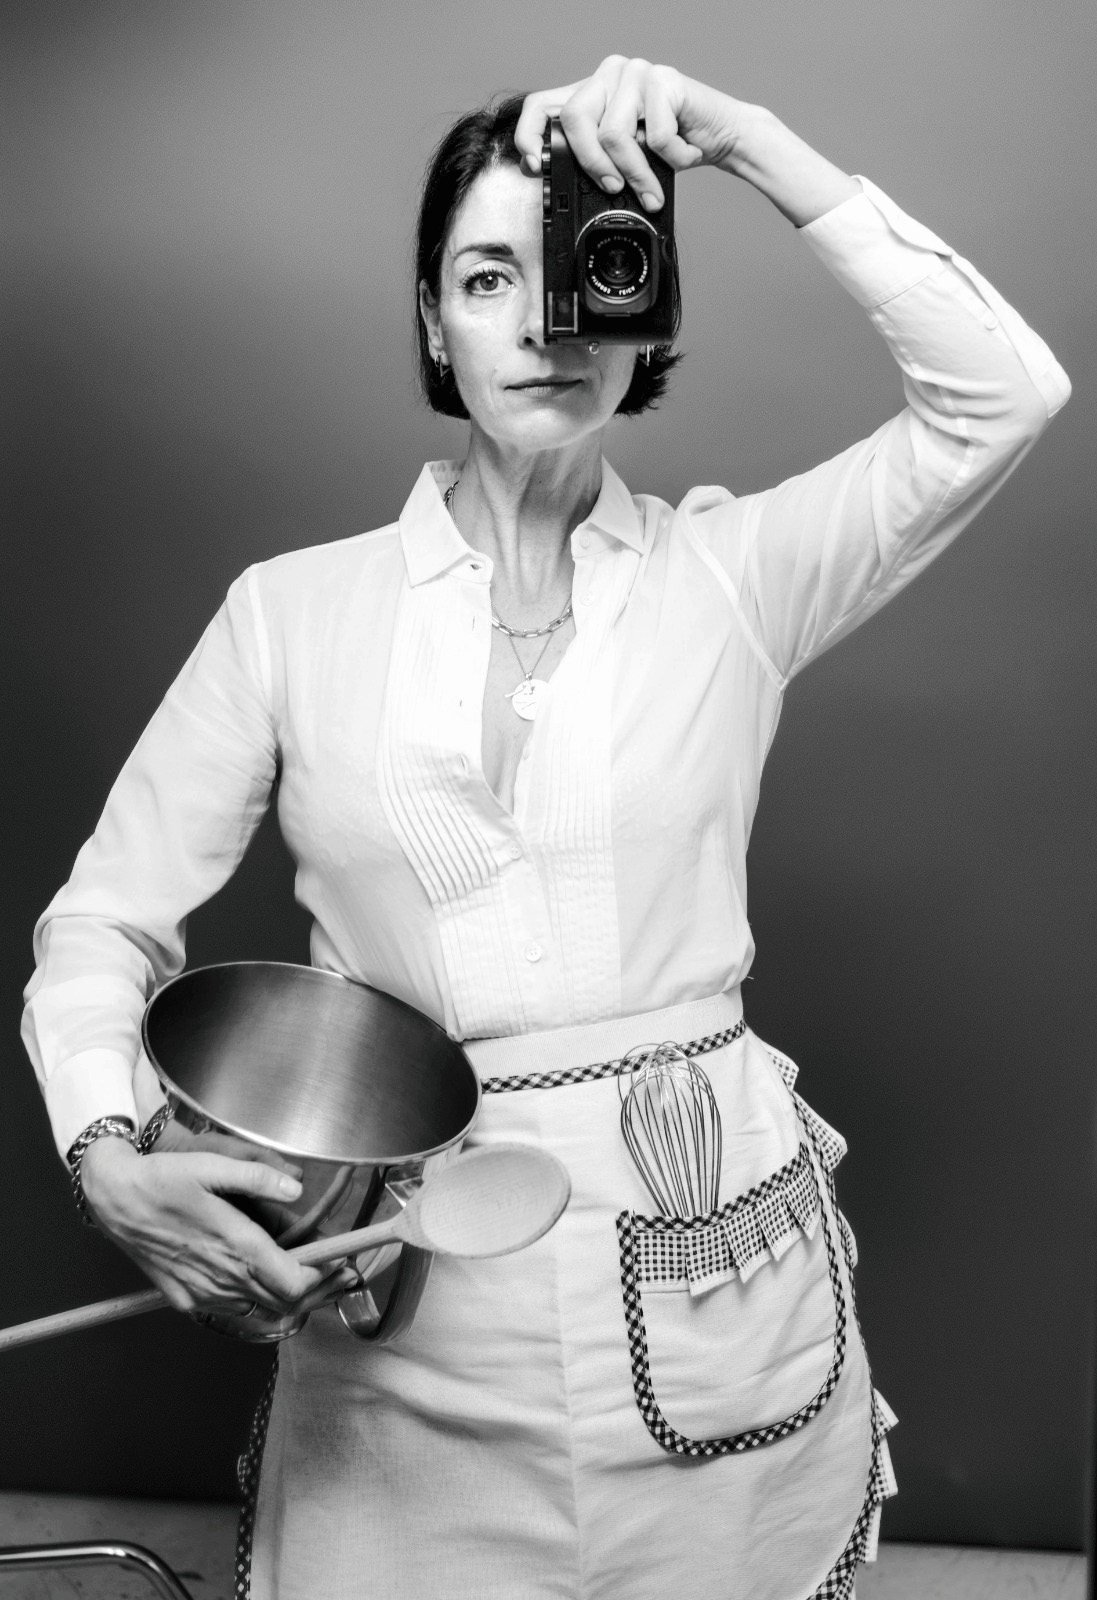 Self-portrait of Mary McCartney, whose latest book Feeding Creativity pairs her vegetarian recipes with photos of the stars she made them for. Photo: Mary McCartney